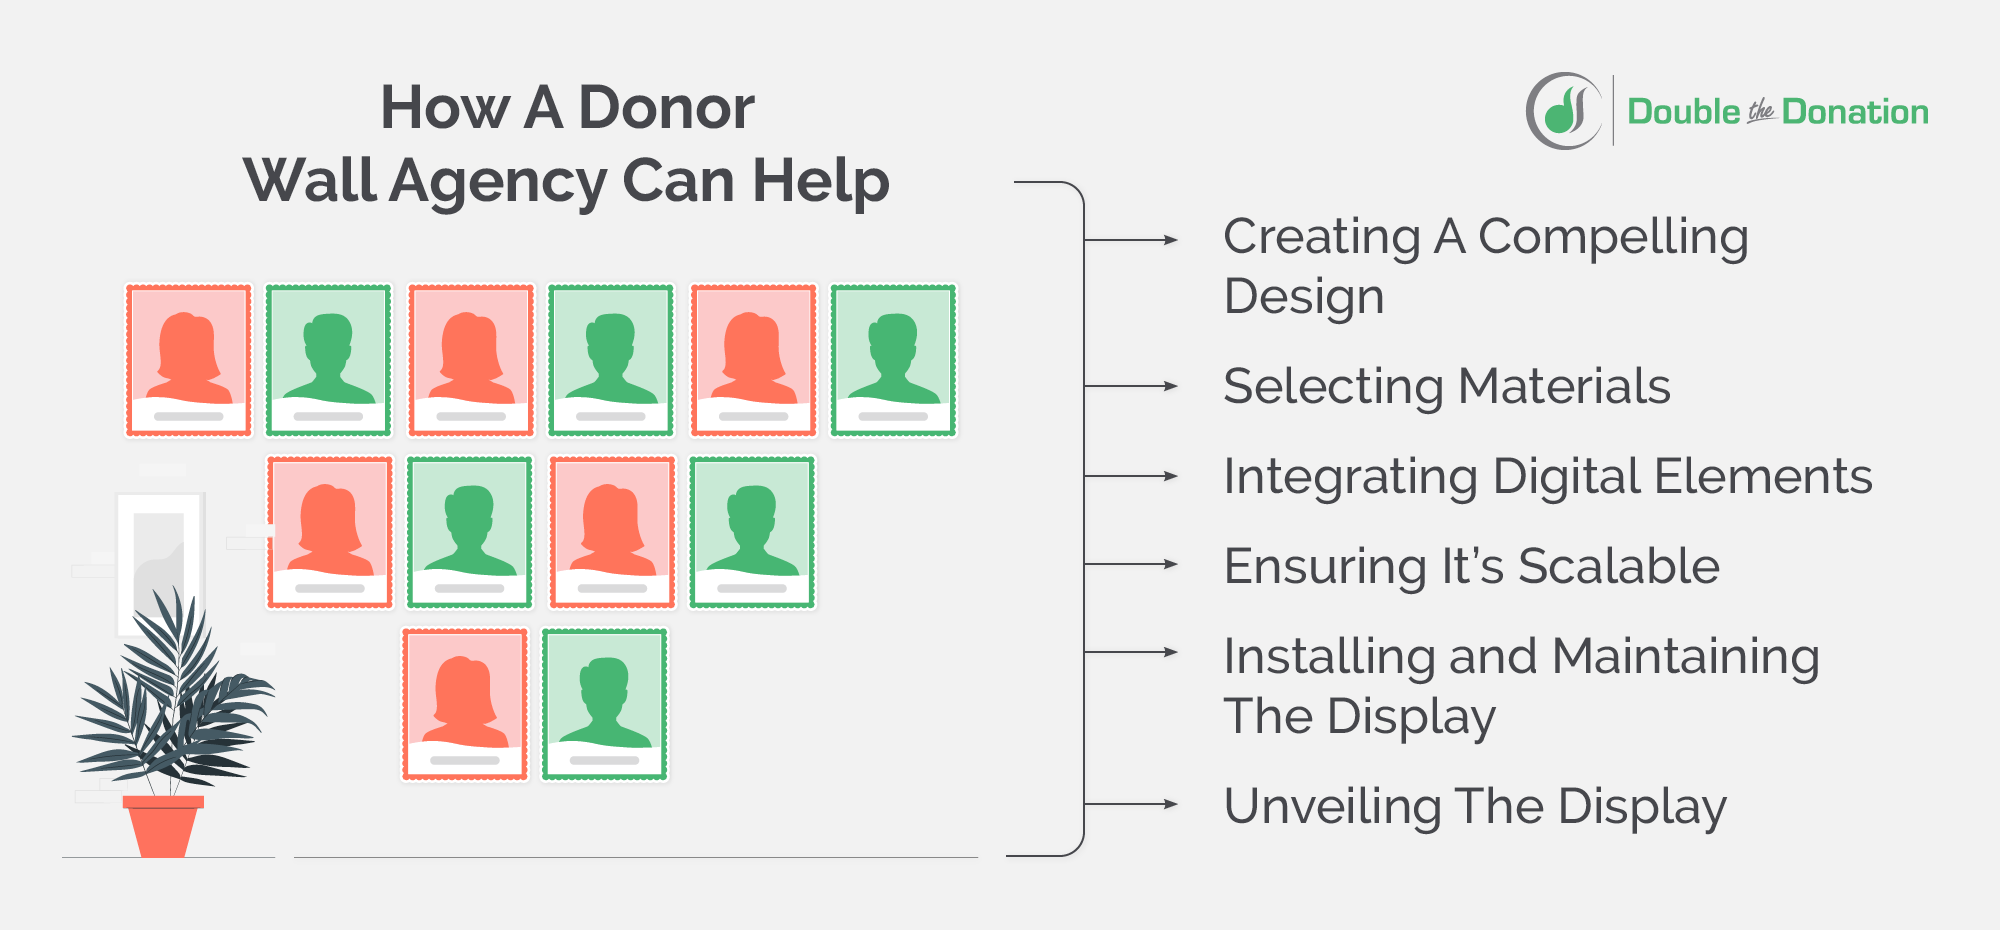 Donor wall agencies can assist in several areas, including everything from selecting material to unveiling.